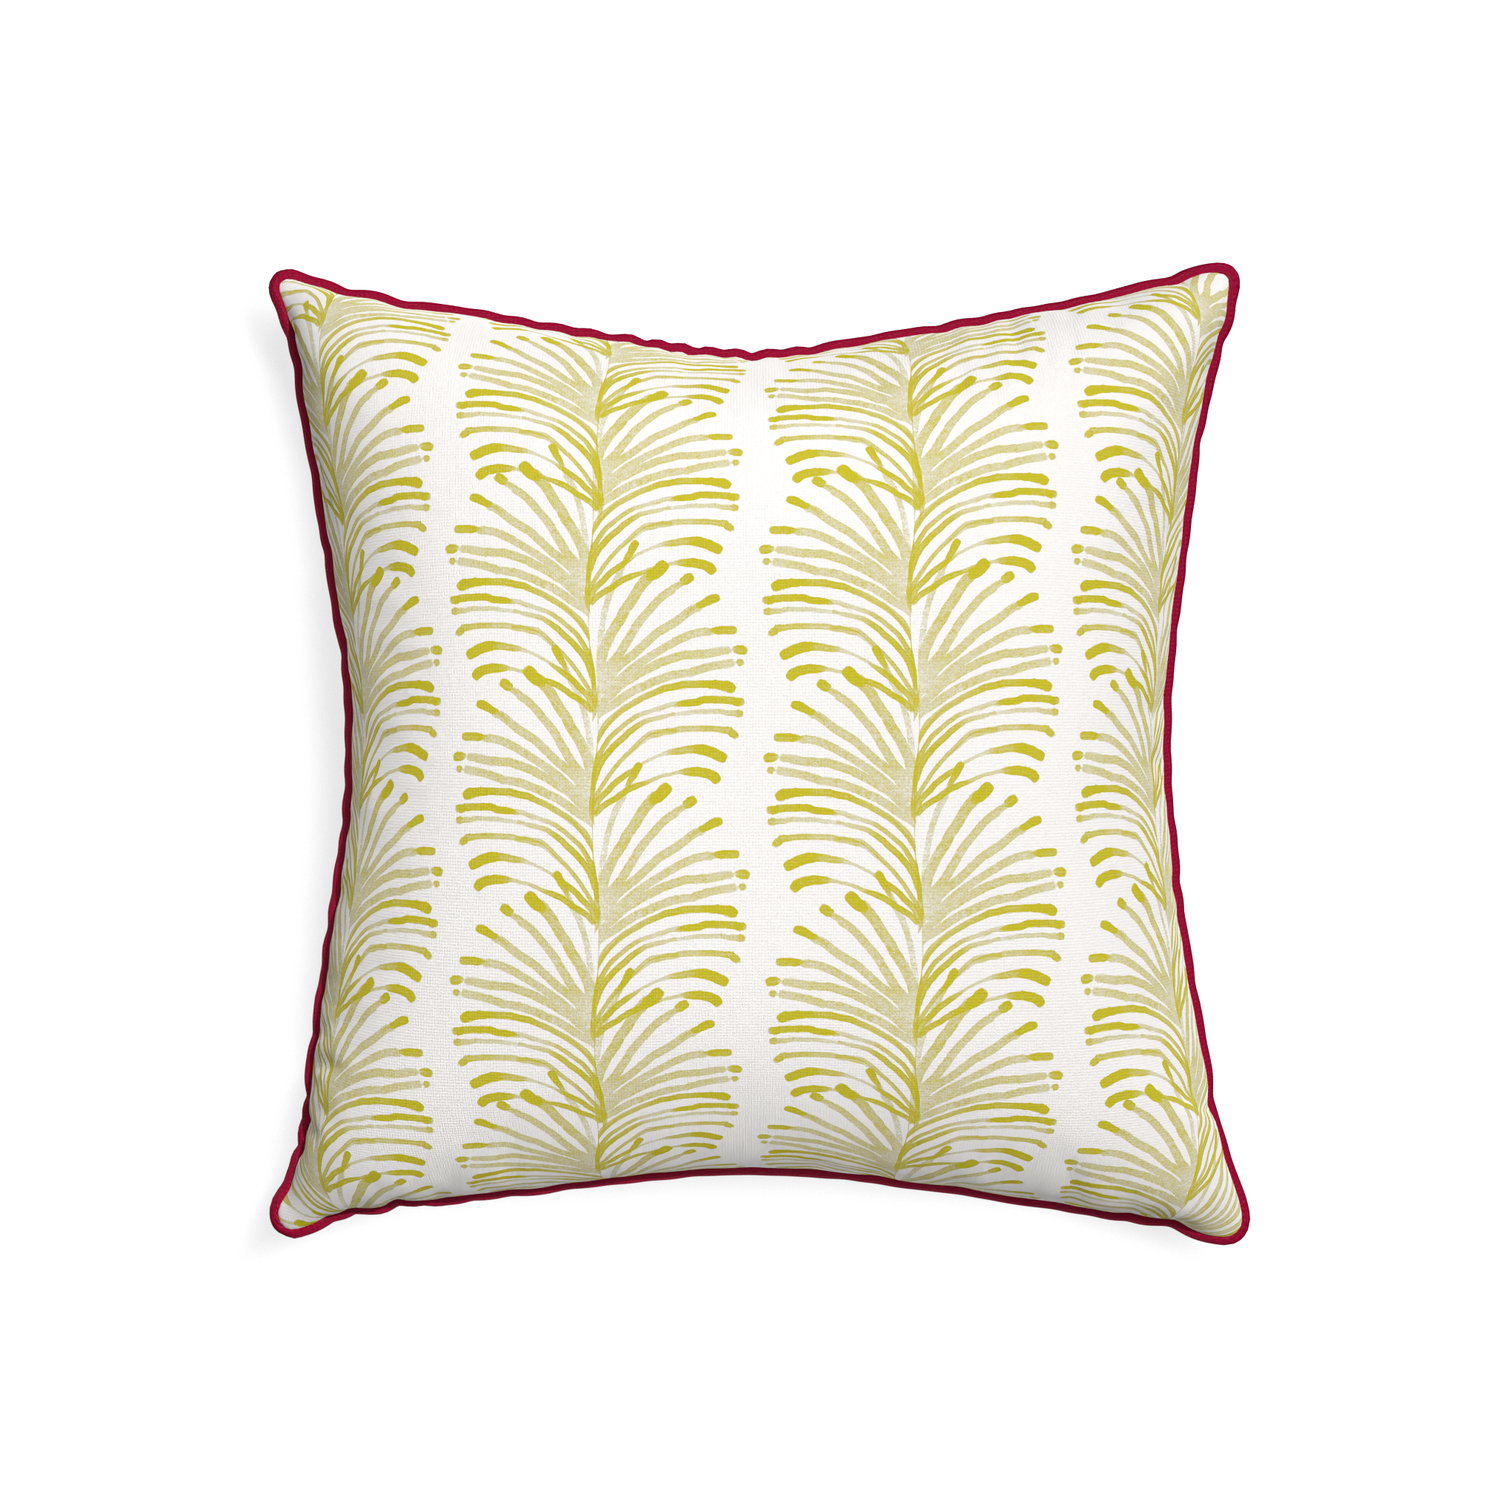 22-square emma chartreuse custom yellow stripe chartreusepillow with raspberry piping on white background